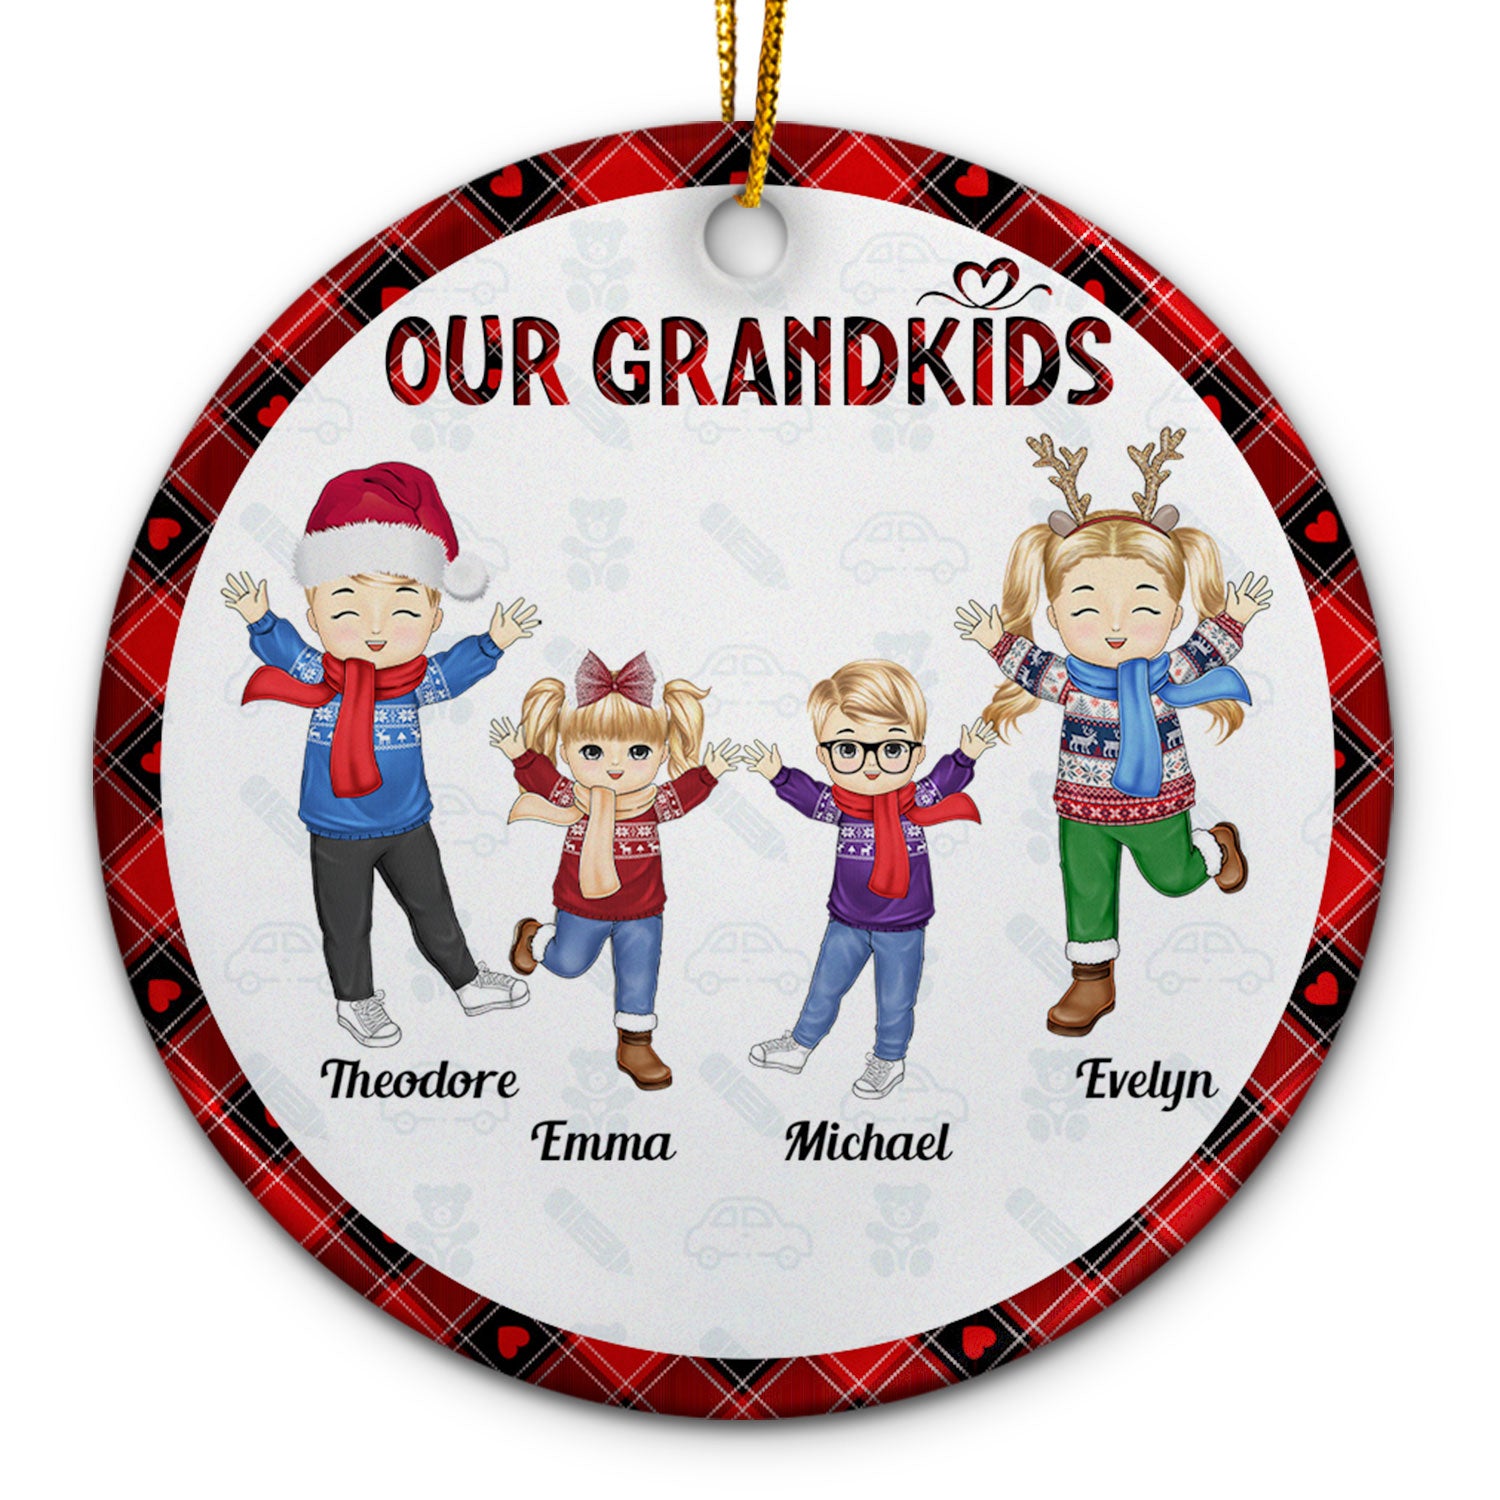 Happy Our Grandkids - Christmas Gift For Grandparents, Parents, Family - Personalized Circle Ceramic Ornament